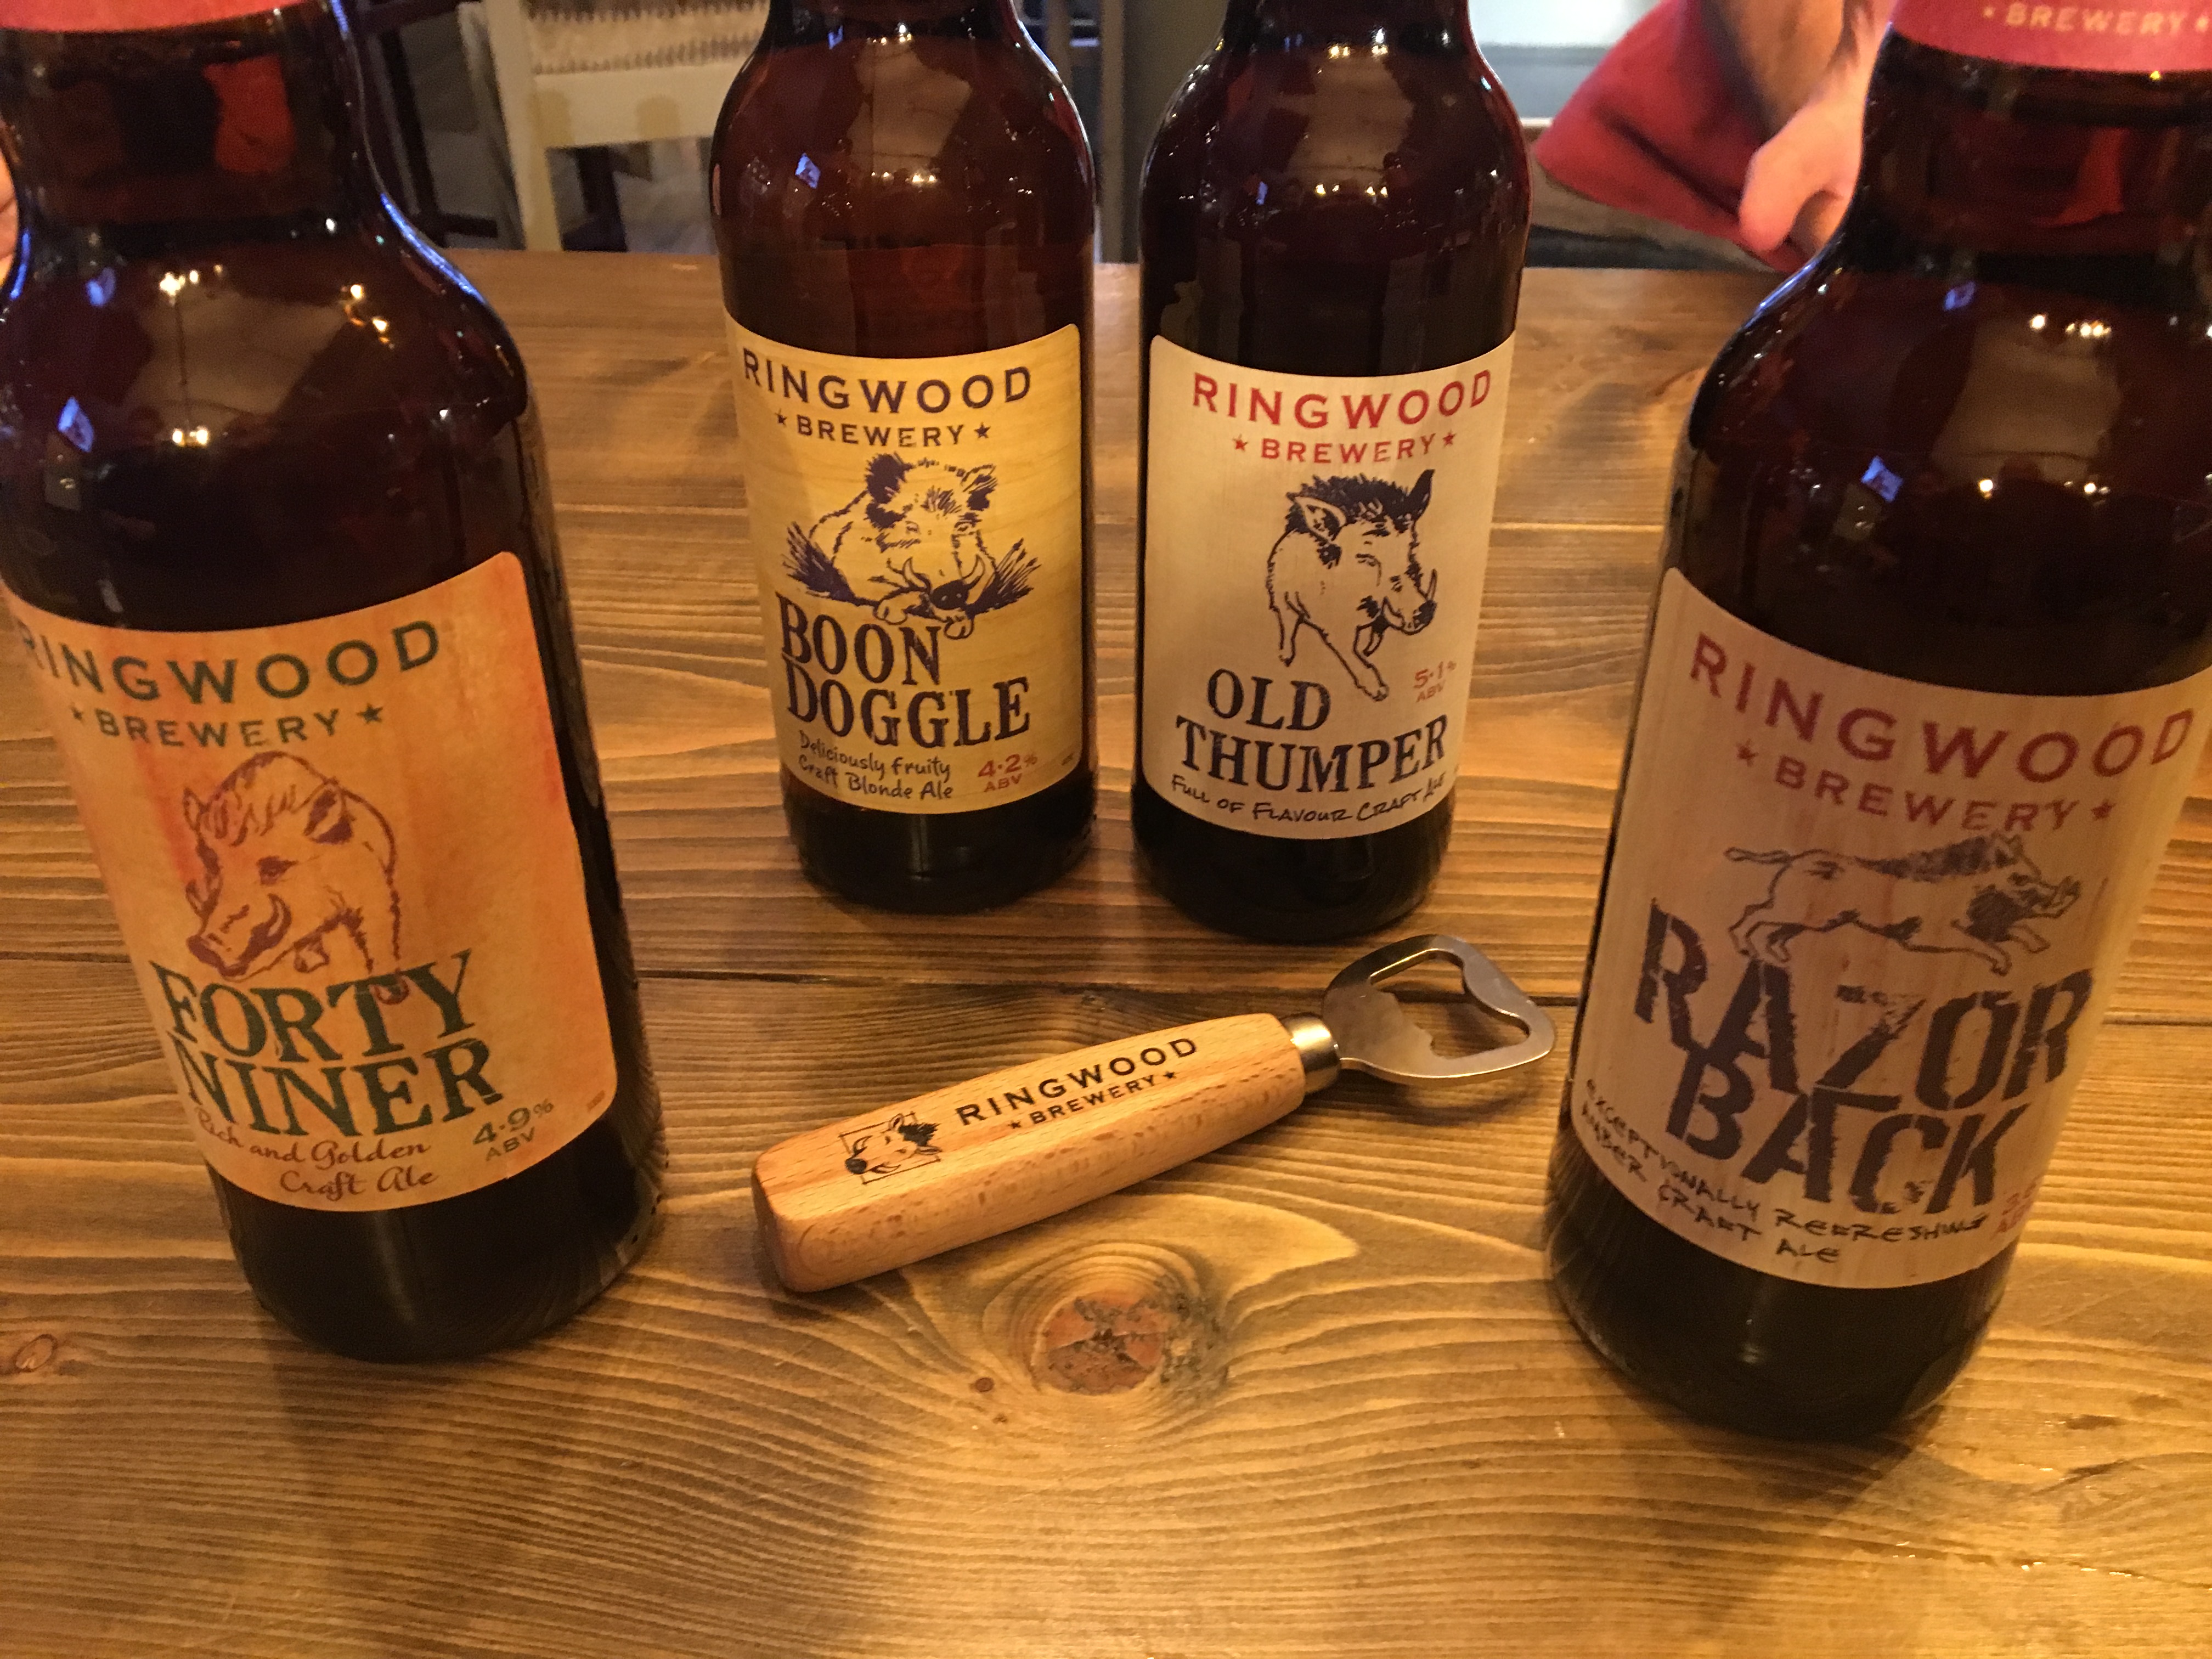 Review of Ringwood Brewery and their beers